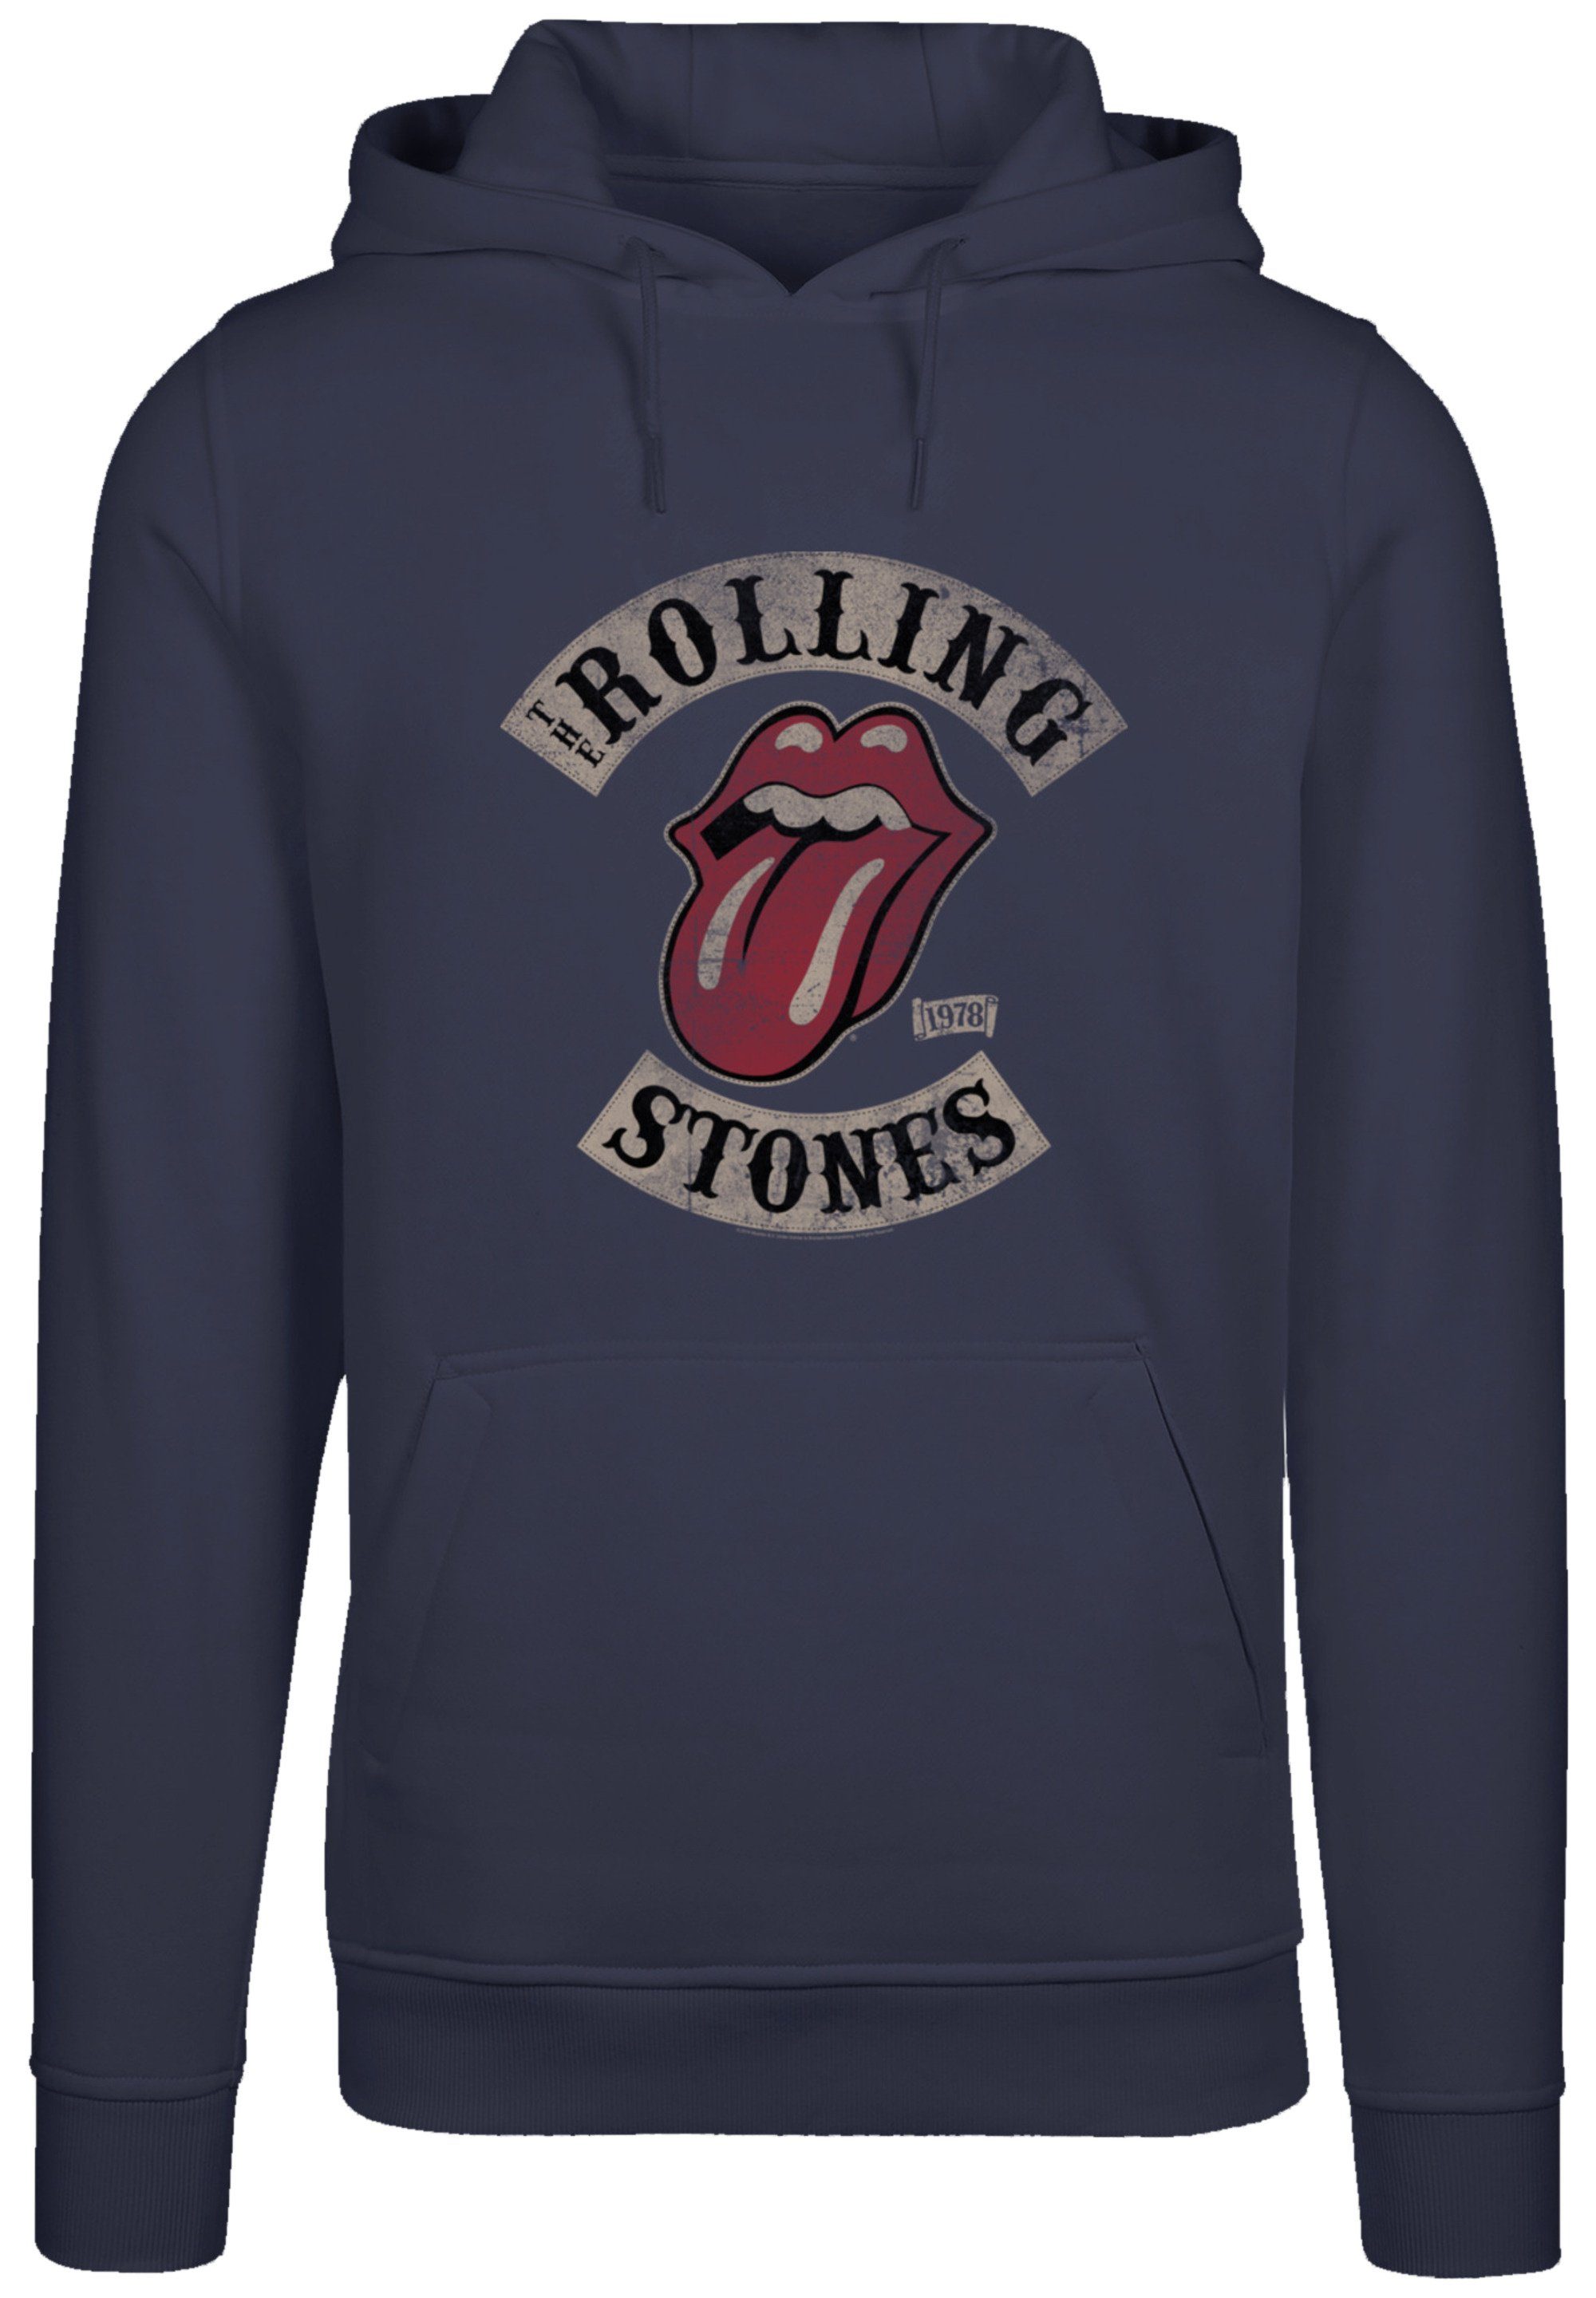 F4NT4STIC Kapuzenpullover The Rolling Stones Tour Rock Musik Band Hoodie, Warm, Bequem navy | Hoodies